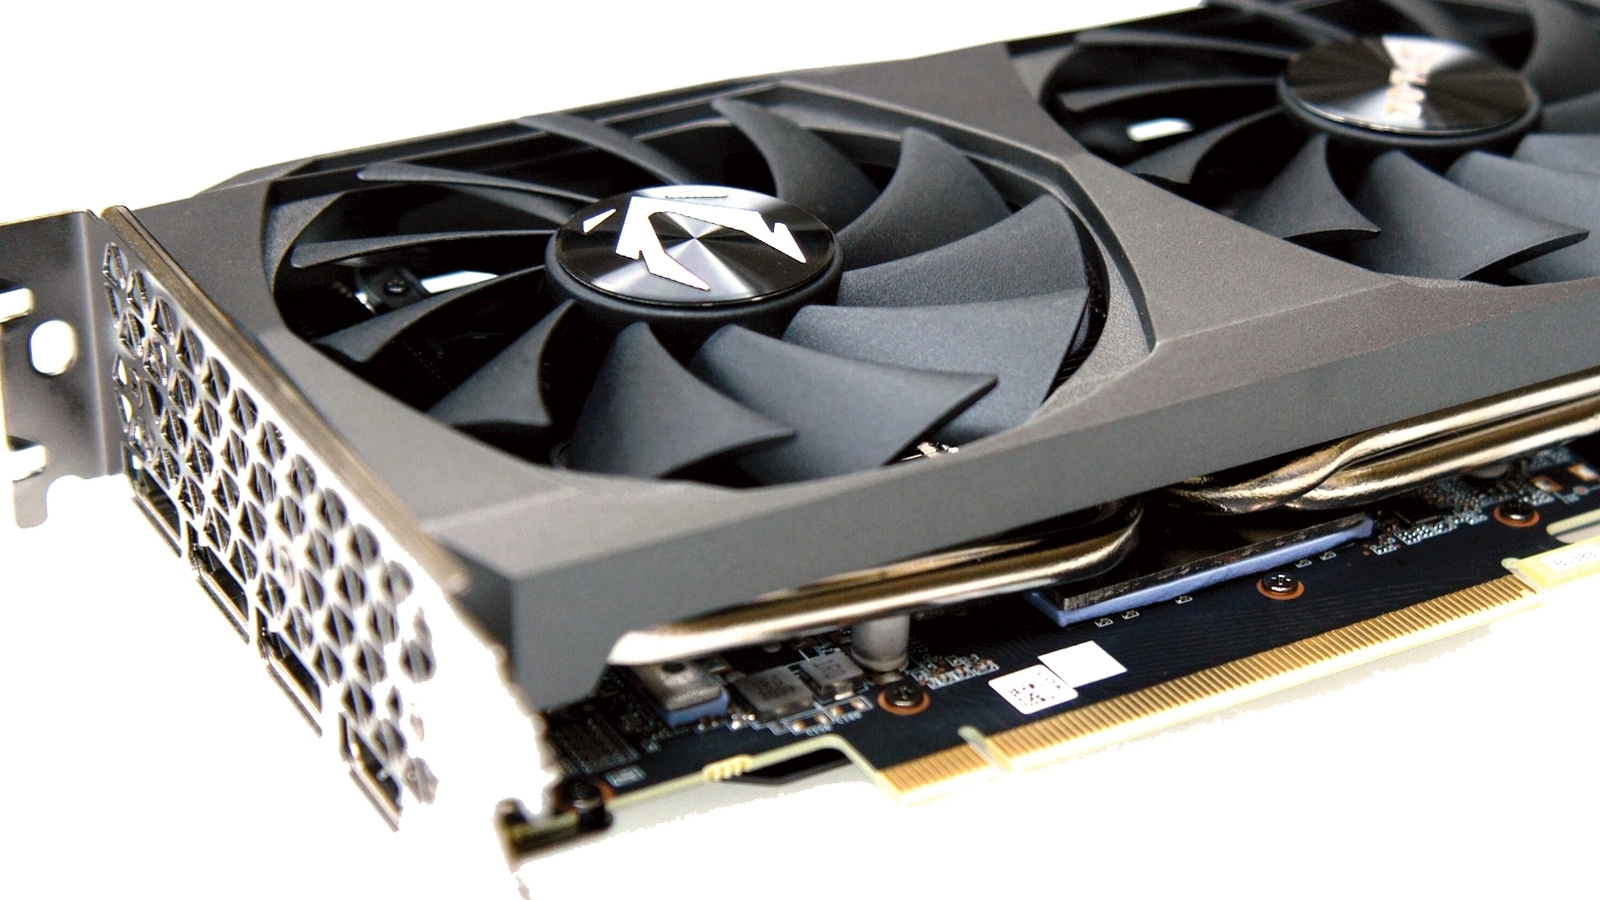 GEFORCE RTX 3060 12GB GDDR6 Graphics Card The Ultimate Play - X-VSION  GRAPHICS CARD